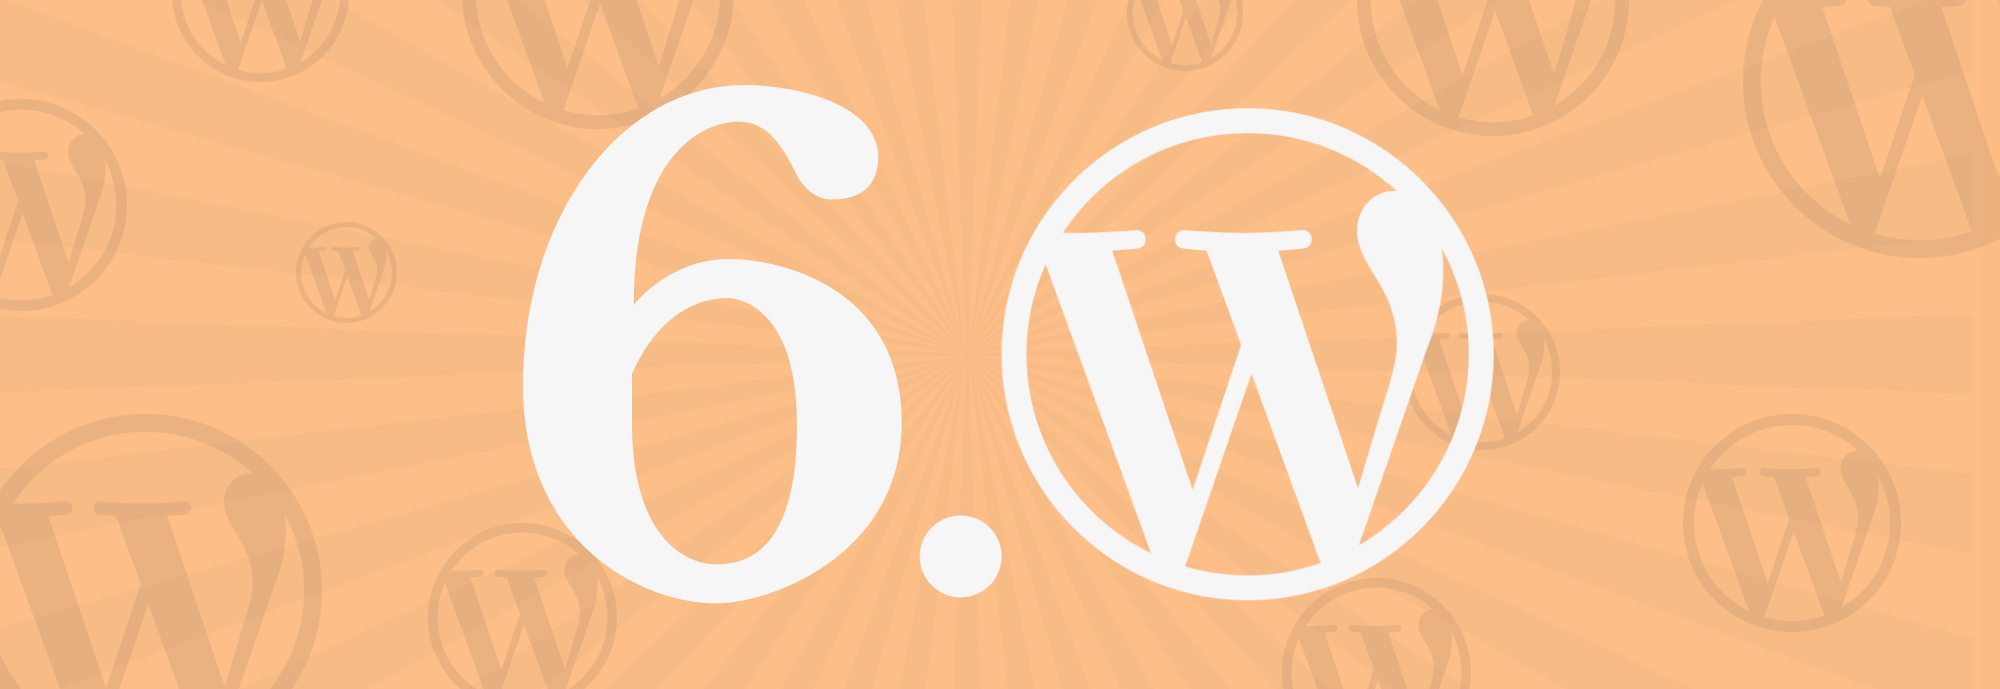 An image with a "6.0" in the center with the 0 replaced by the wordpress logo. Background is orange and has lowered opacity wordpress logos. 